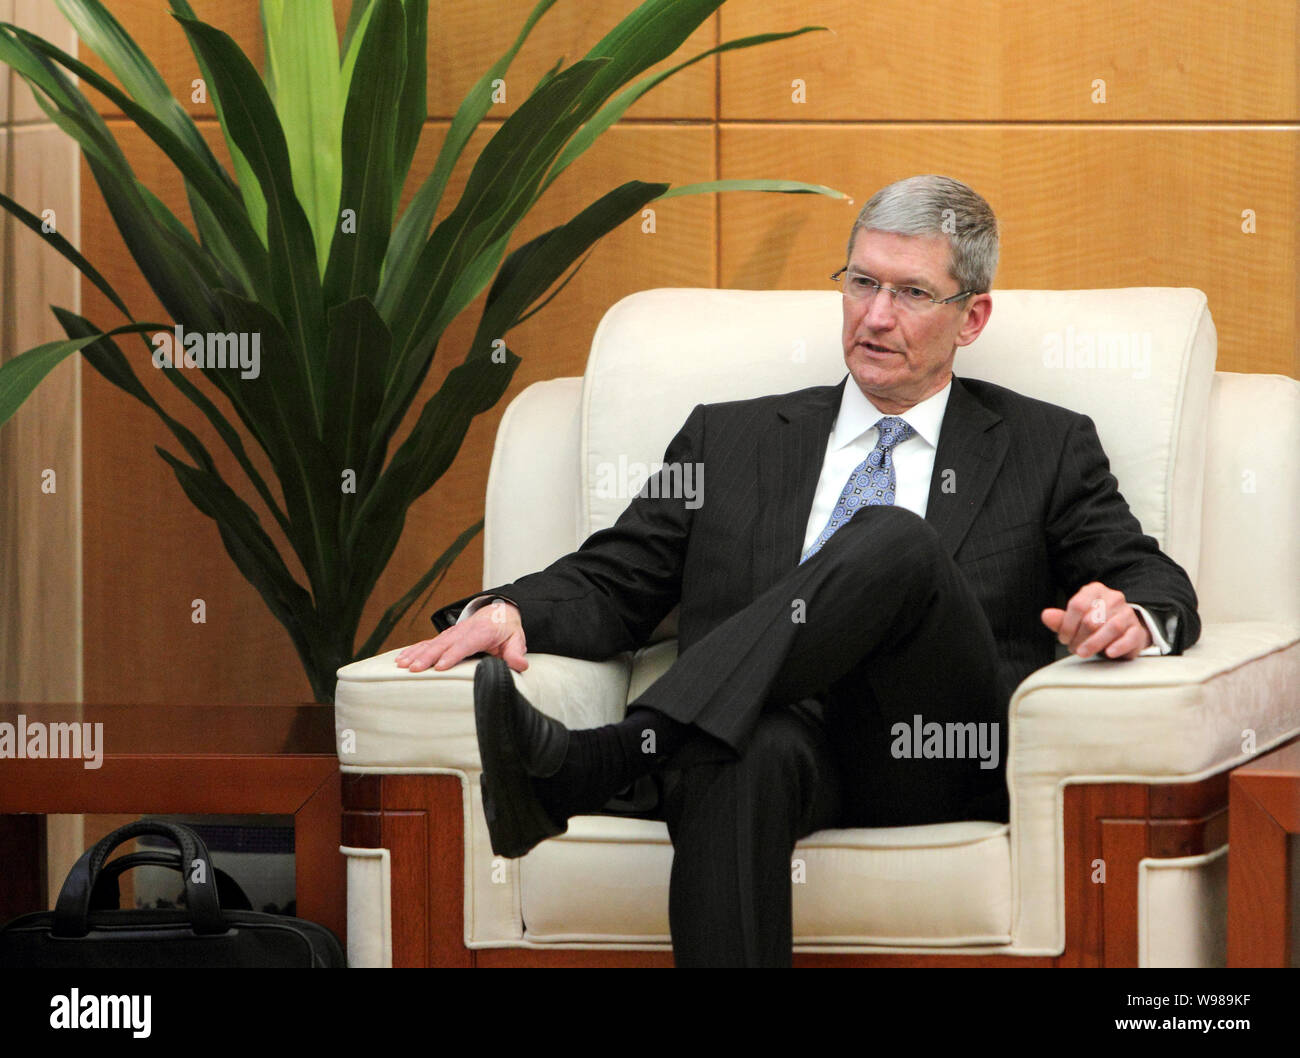 Apple COO Tim Cook is pictured during a meeting in Beijing, China, 22 June 2011.   Apple COO Tim Cook was reportedly paid a secret visit on Wednesday Stock Photo